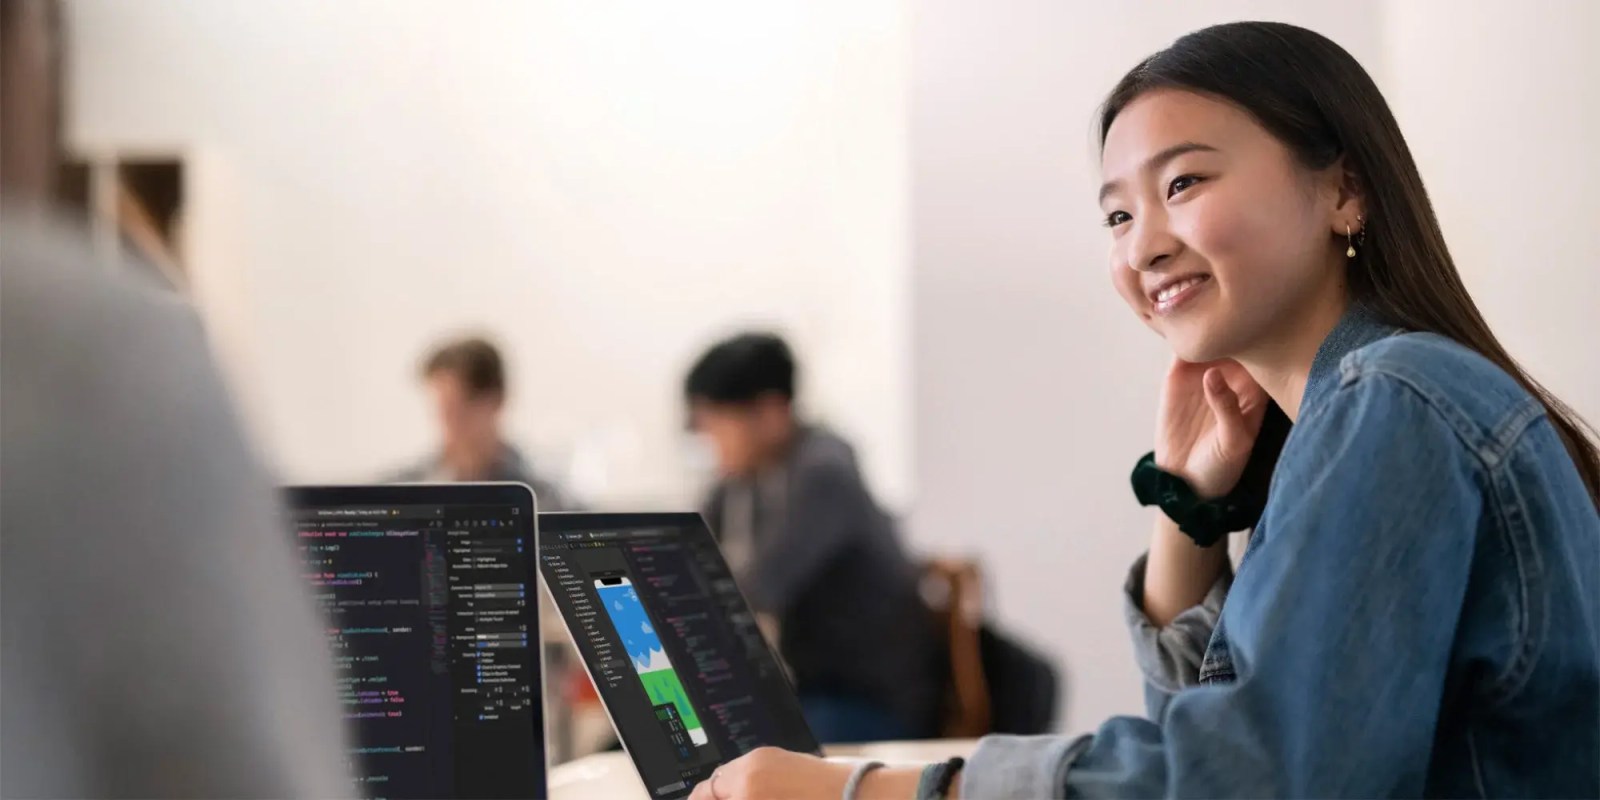 Apple launches ‘Meet with Apple Experts’ developer program with labs, workshops, and more